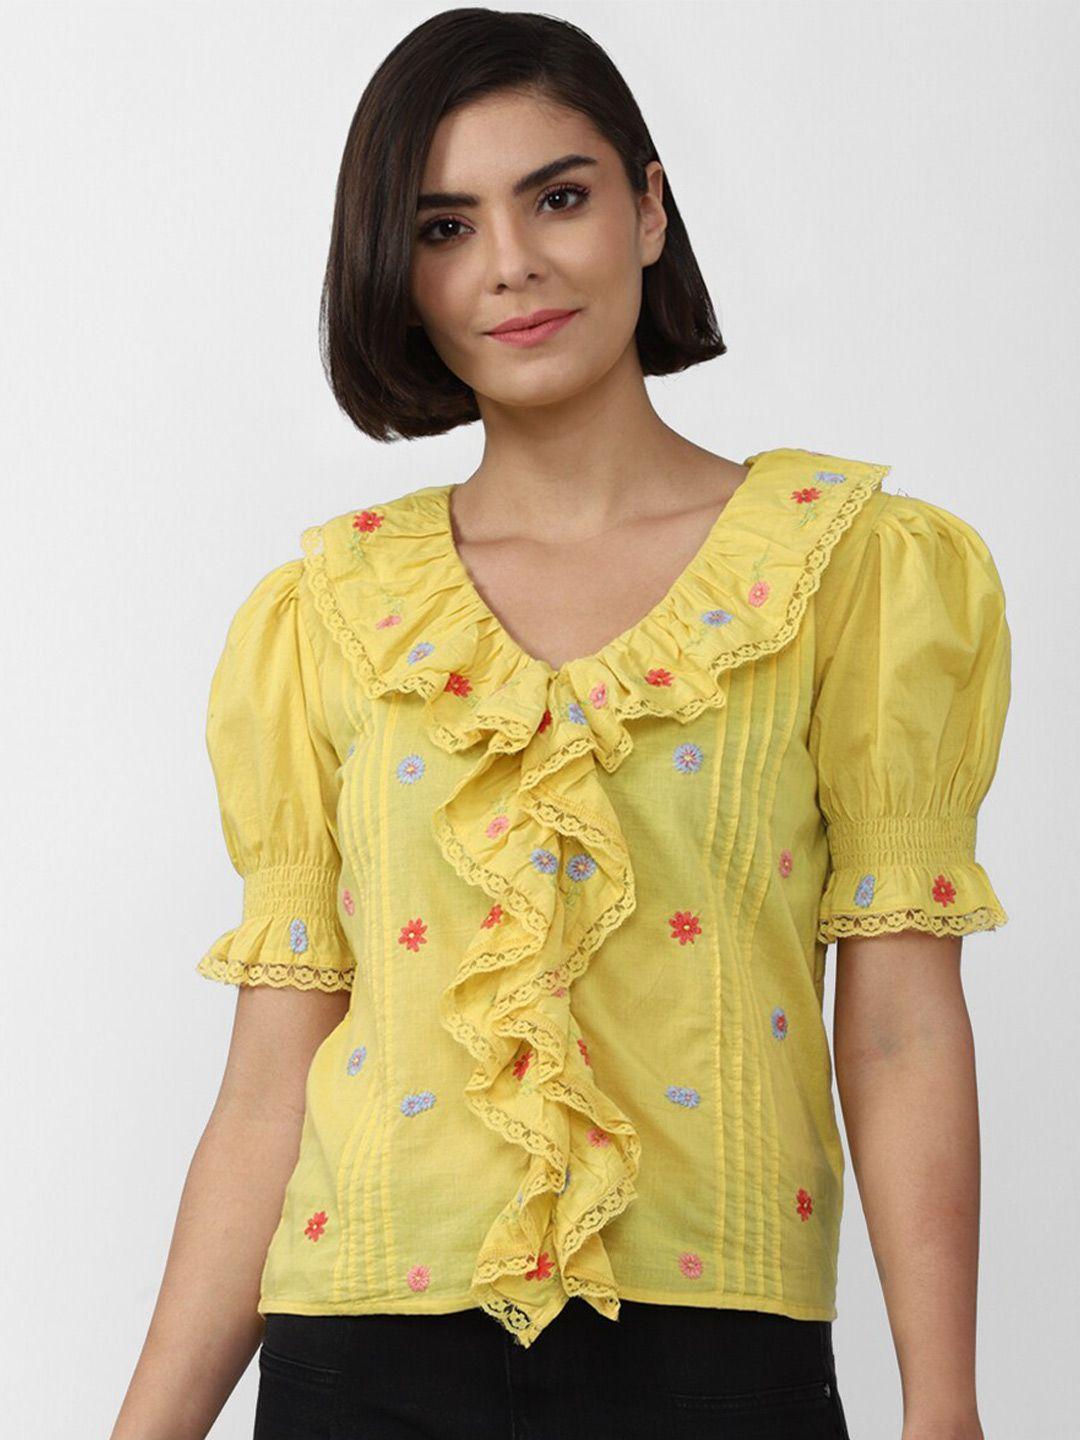 forever-21-yellow-&-pink-floral-embroidered-ruffles-top